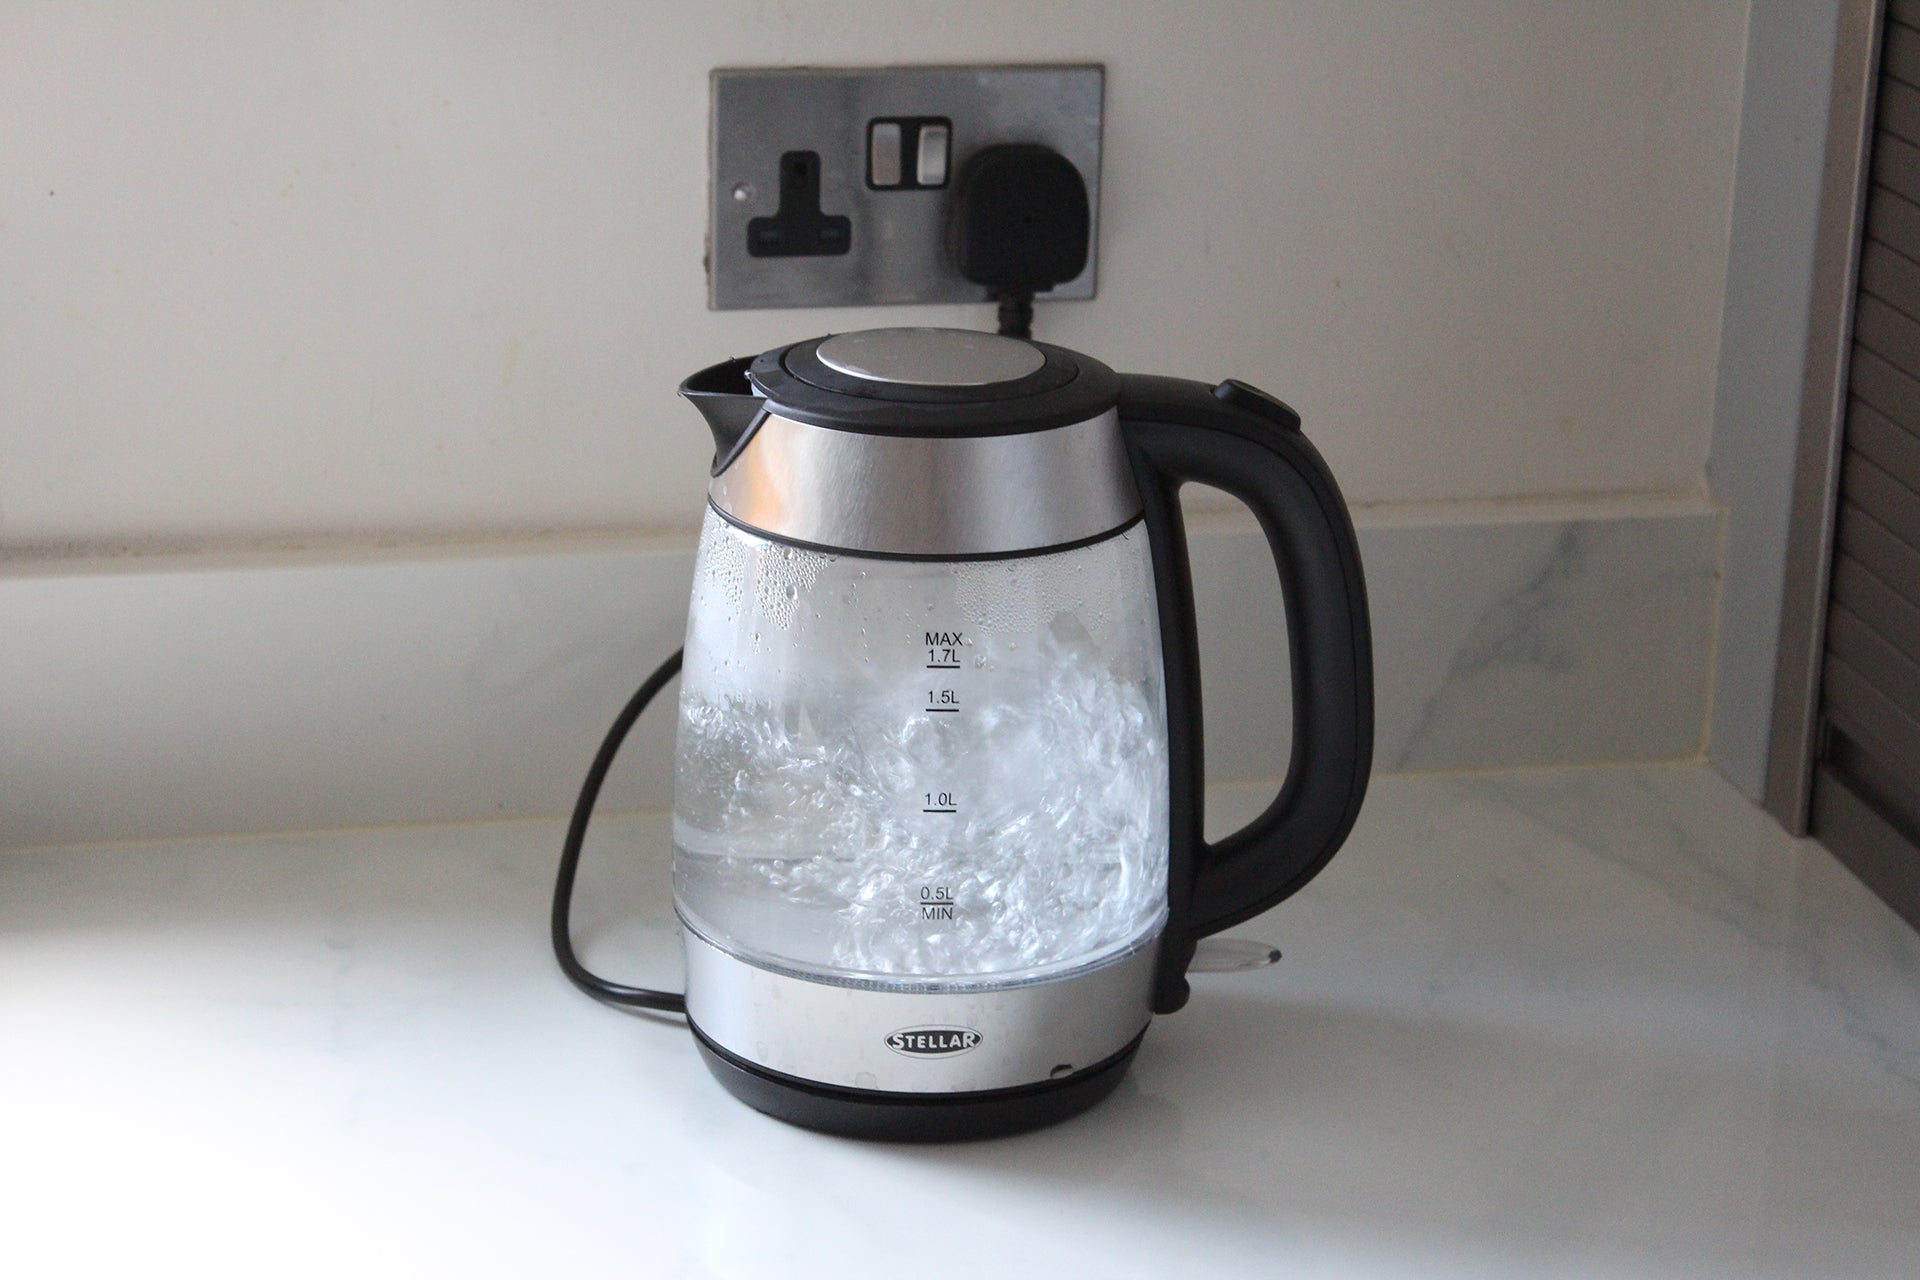 A black and silver Stellar SEA35 electric glass kettle plugged in with ice filled inside